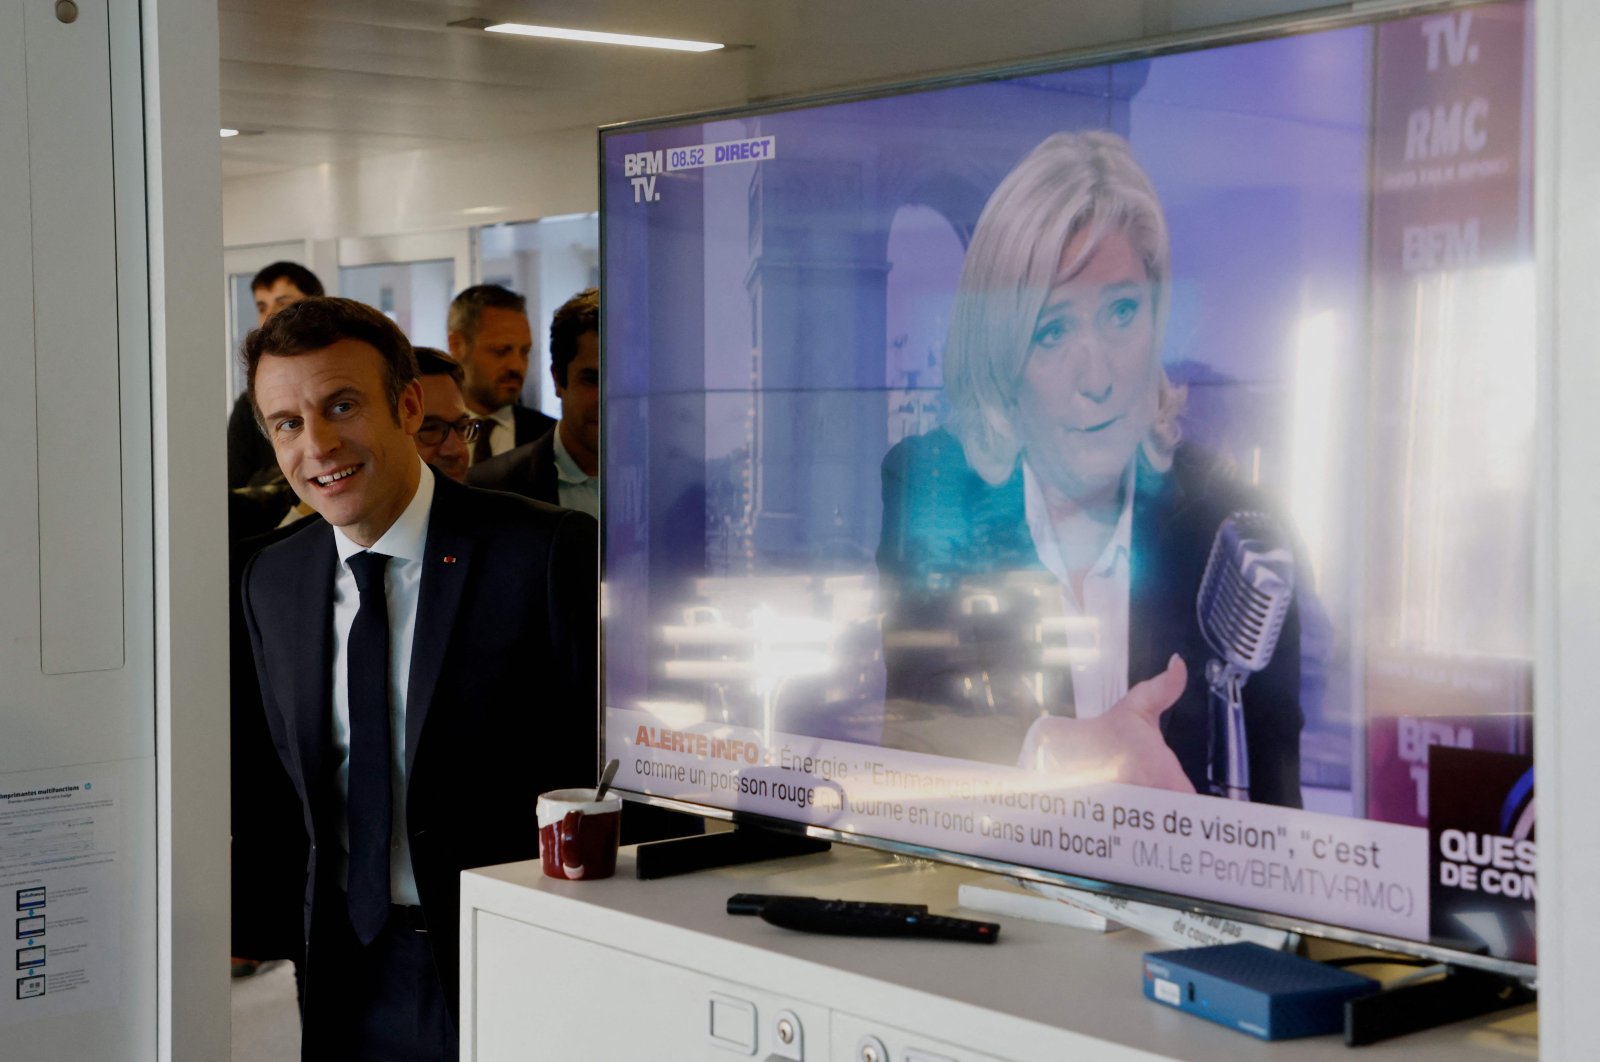 French President Emmanuel Macron visits France Inter&#039;s office, next to a TV screen displaying French far-right party Rassemblement National (RN) presidential candidate Marine Le Pen (R), after the France Inter 7/9 radio broadcast at the Maison de la Radio in Paris, France, April 4, 2022. (AFP Photo)